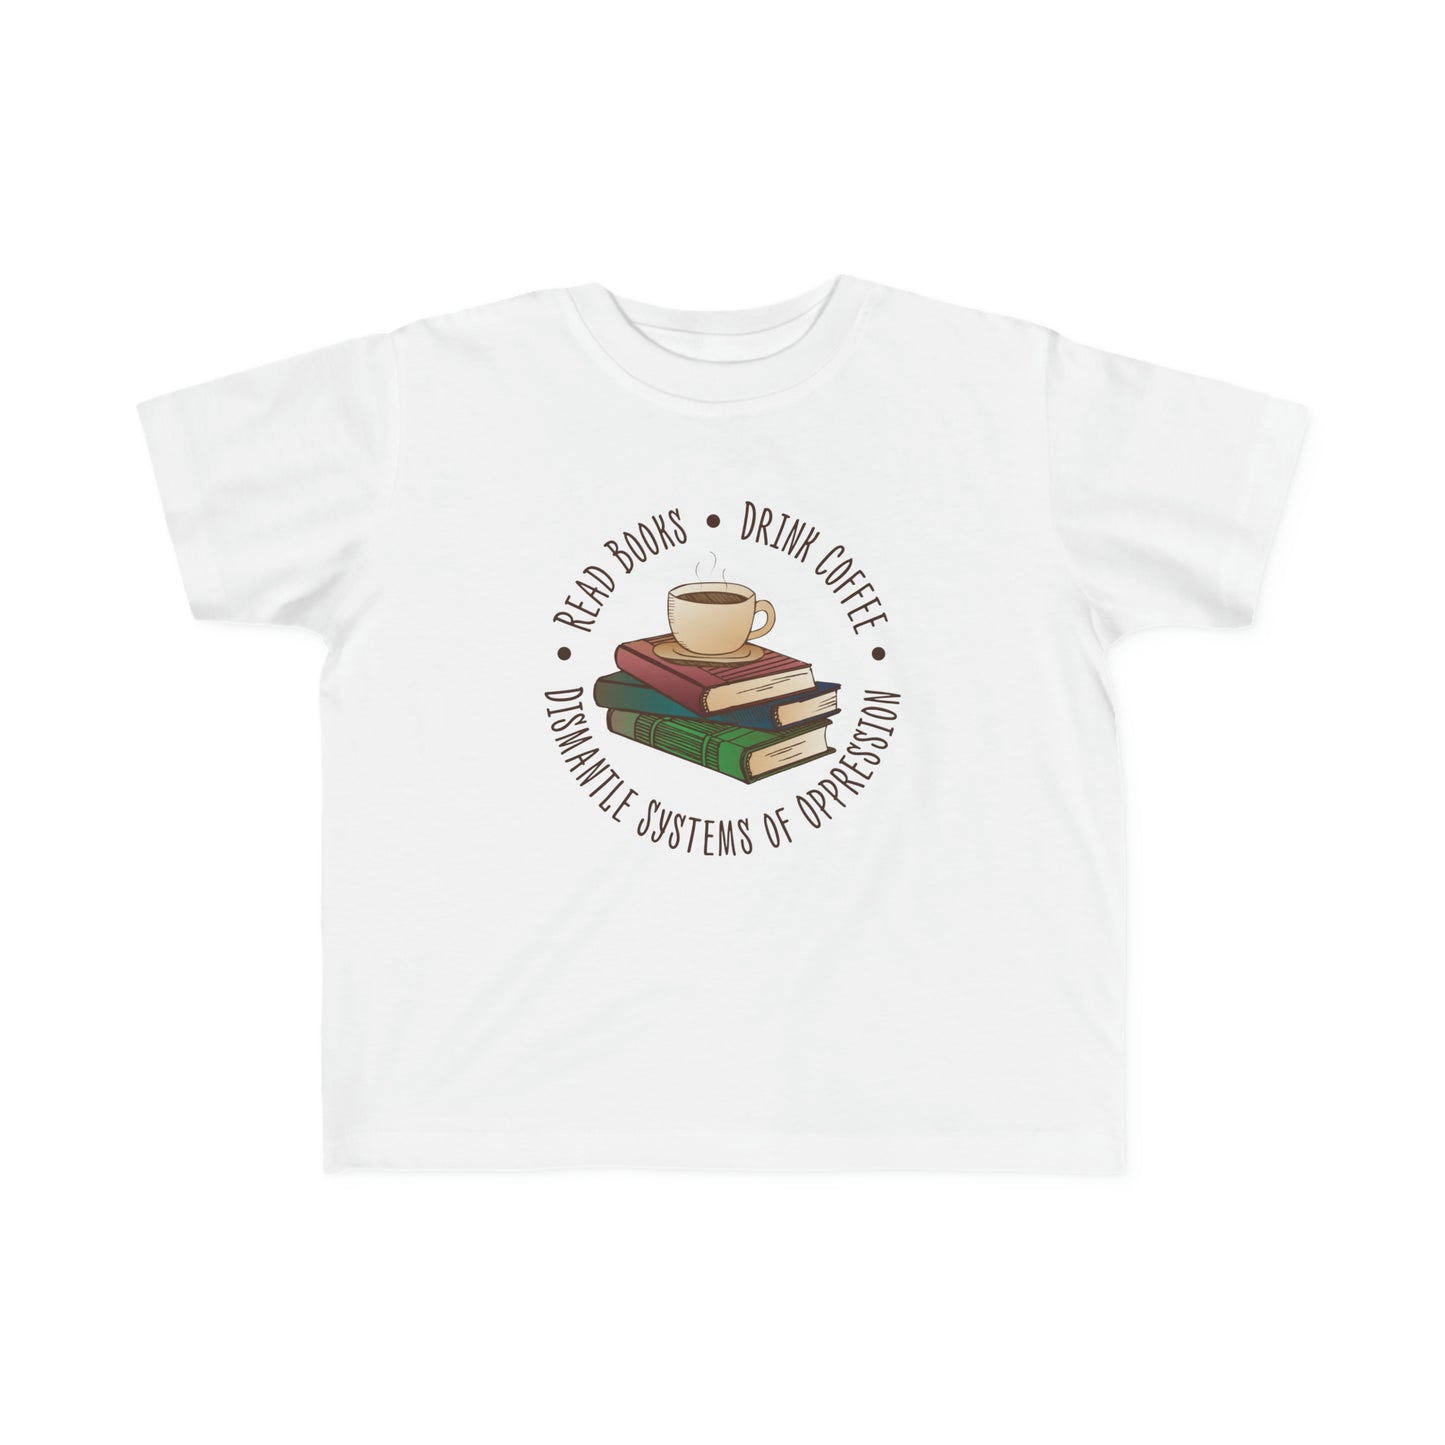 “Dismantle Systems of Oppression” Toddler's Tee